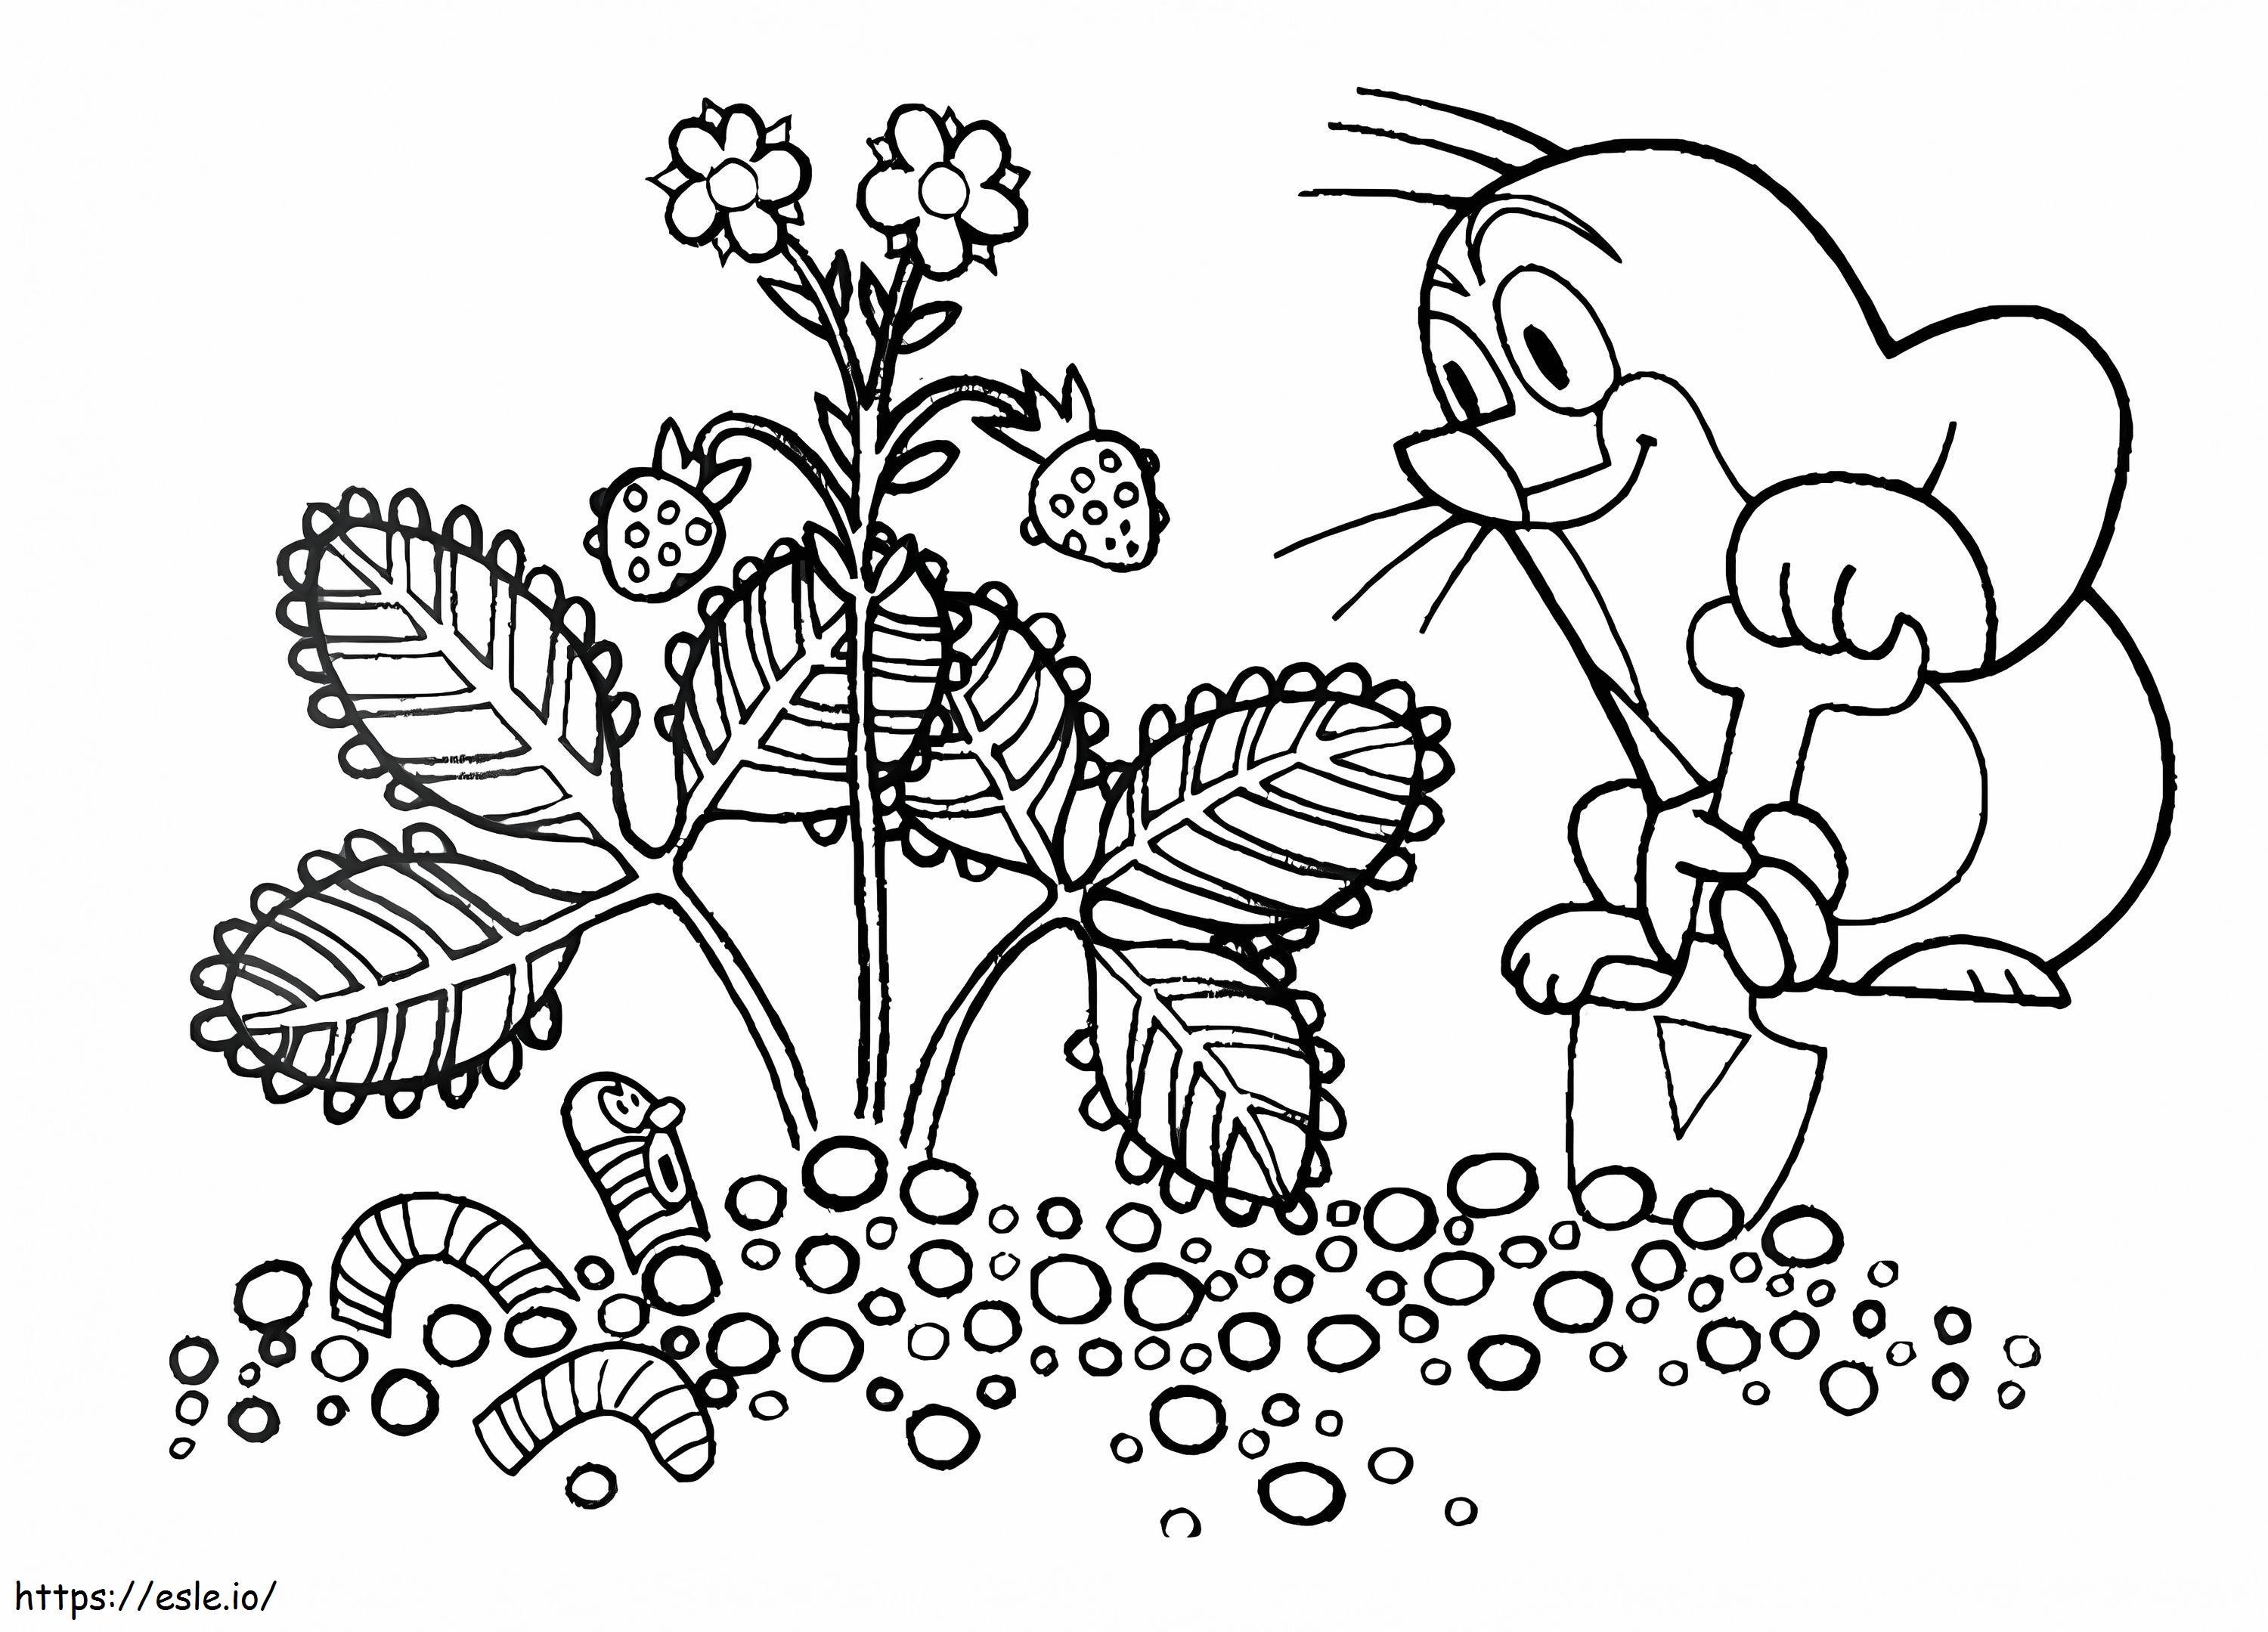 Krtek And Worm coloring page